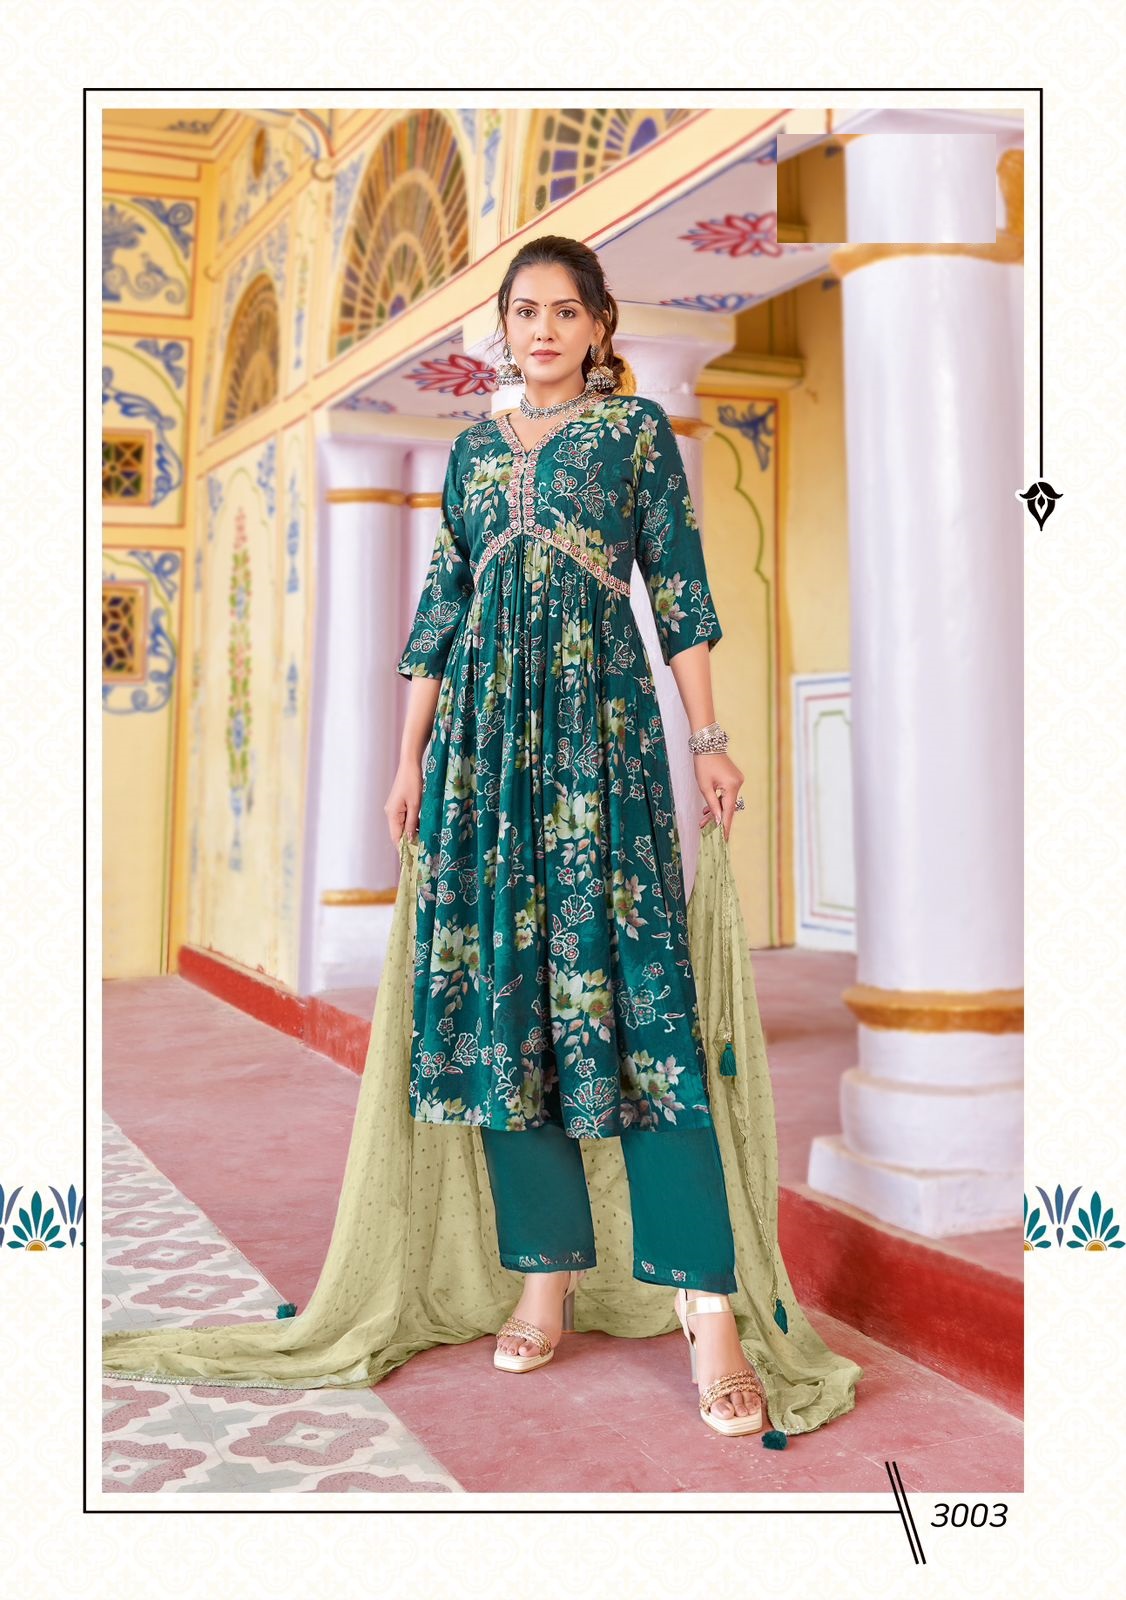 New Designer Model Print with Embroidery and Handwork Kurtis set for women